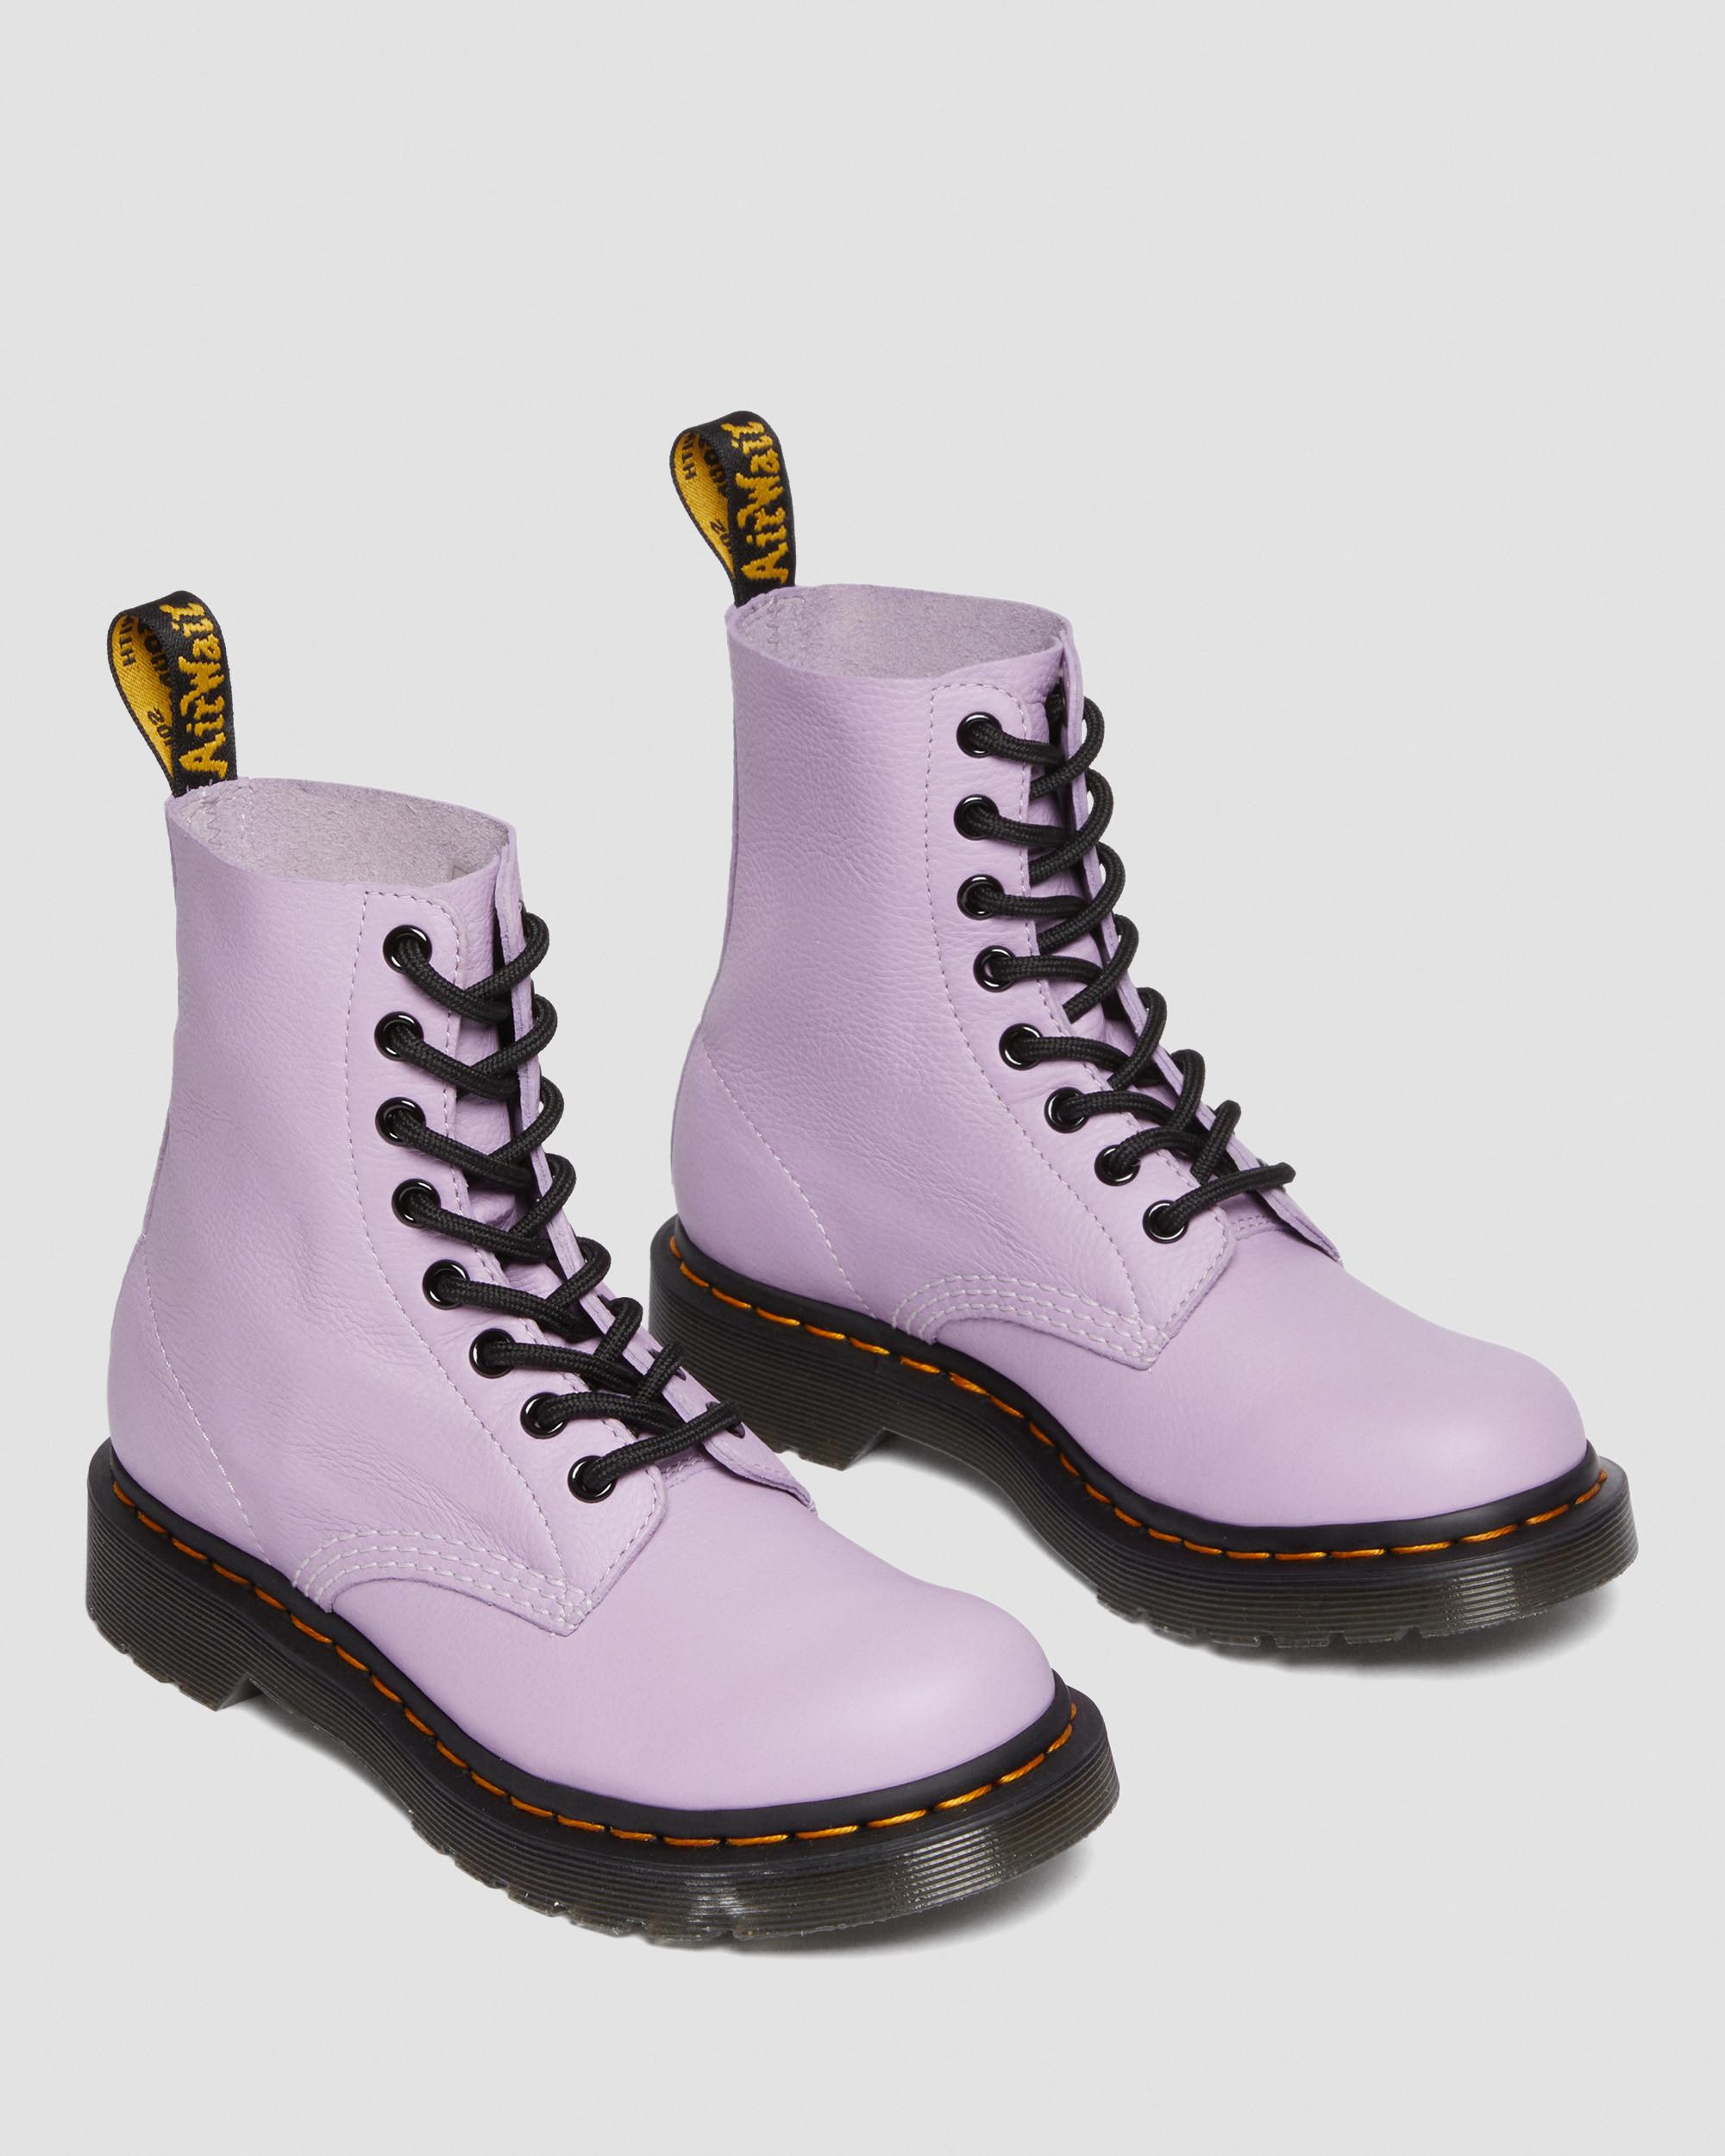 1460 Women\'s Pascal Black Boots Lilac Dr. Eyelet Lace | in Martens Up